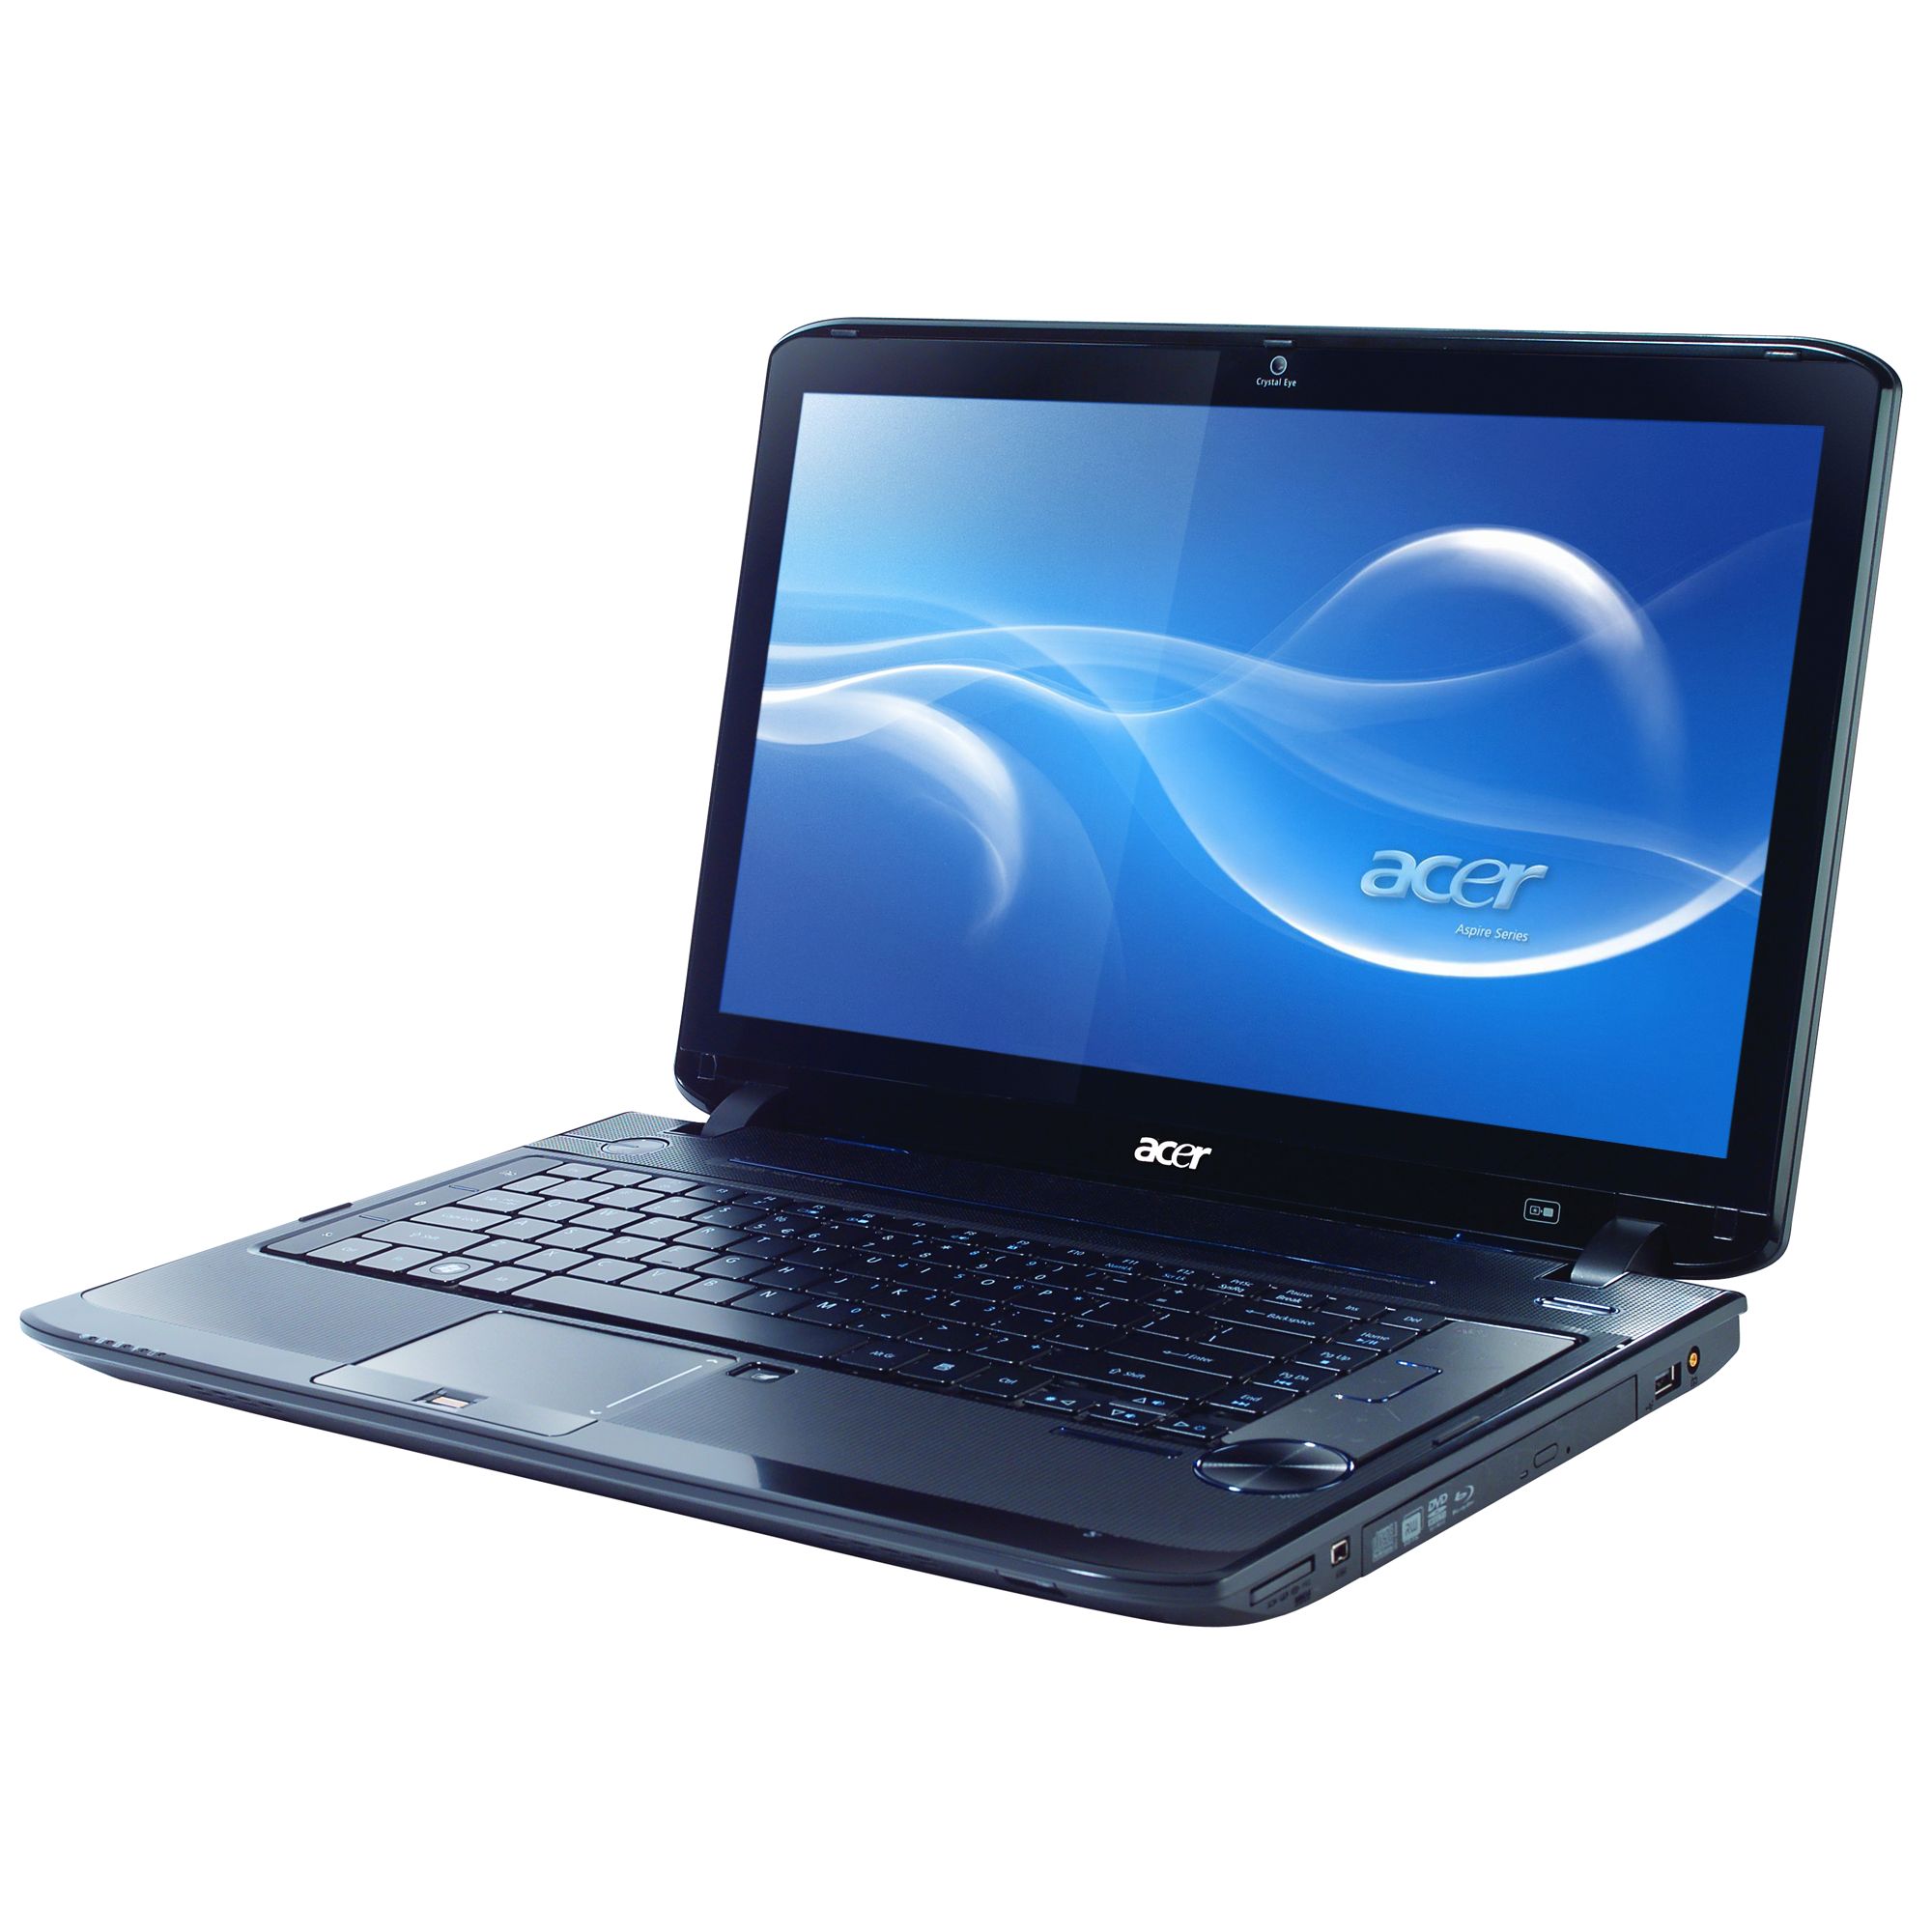 Acer Aspire 5943 Laptop, Intel Core i5, 500GB, 2.4GHz, 4GB RAM with 15.6 Inch Display at John Lewis